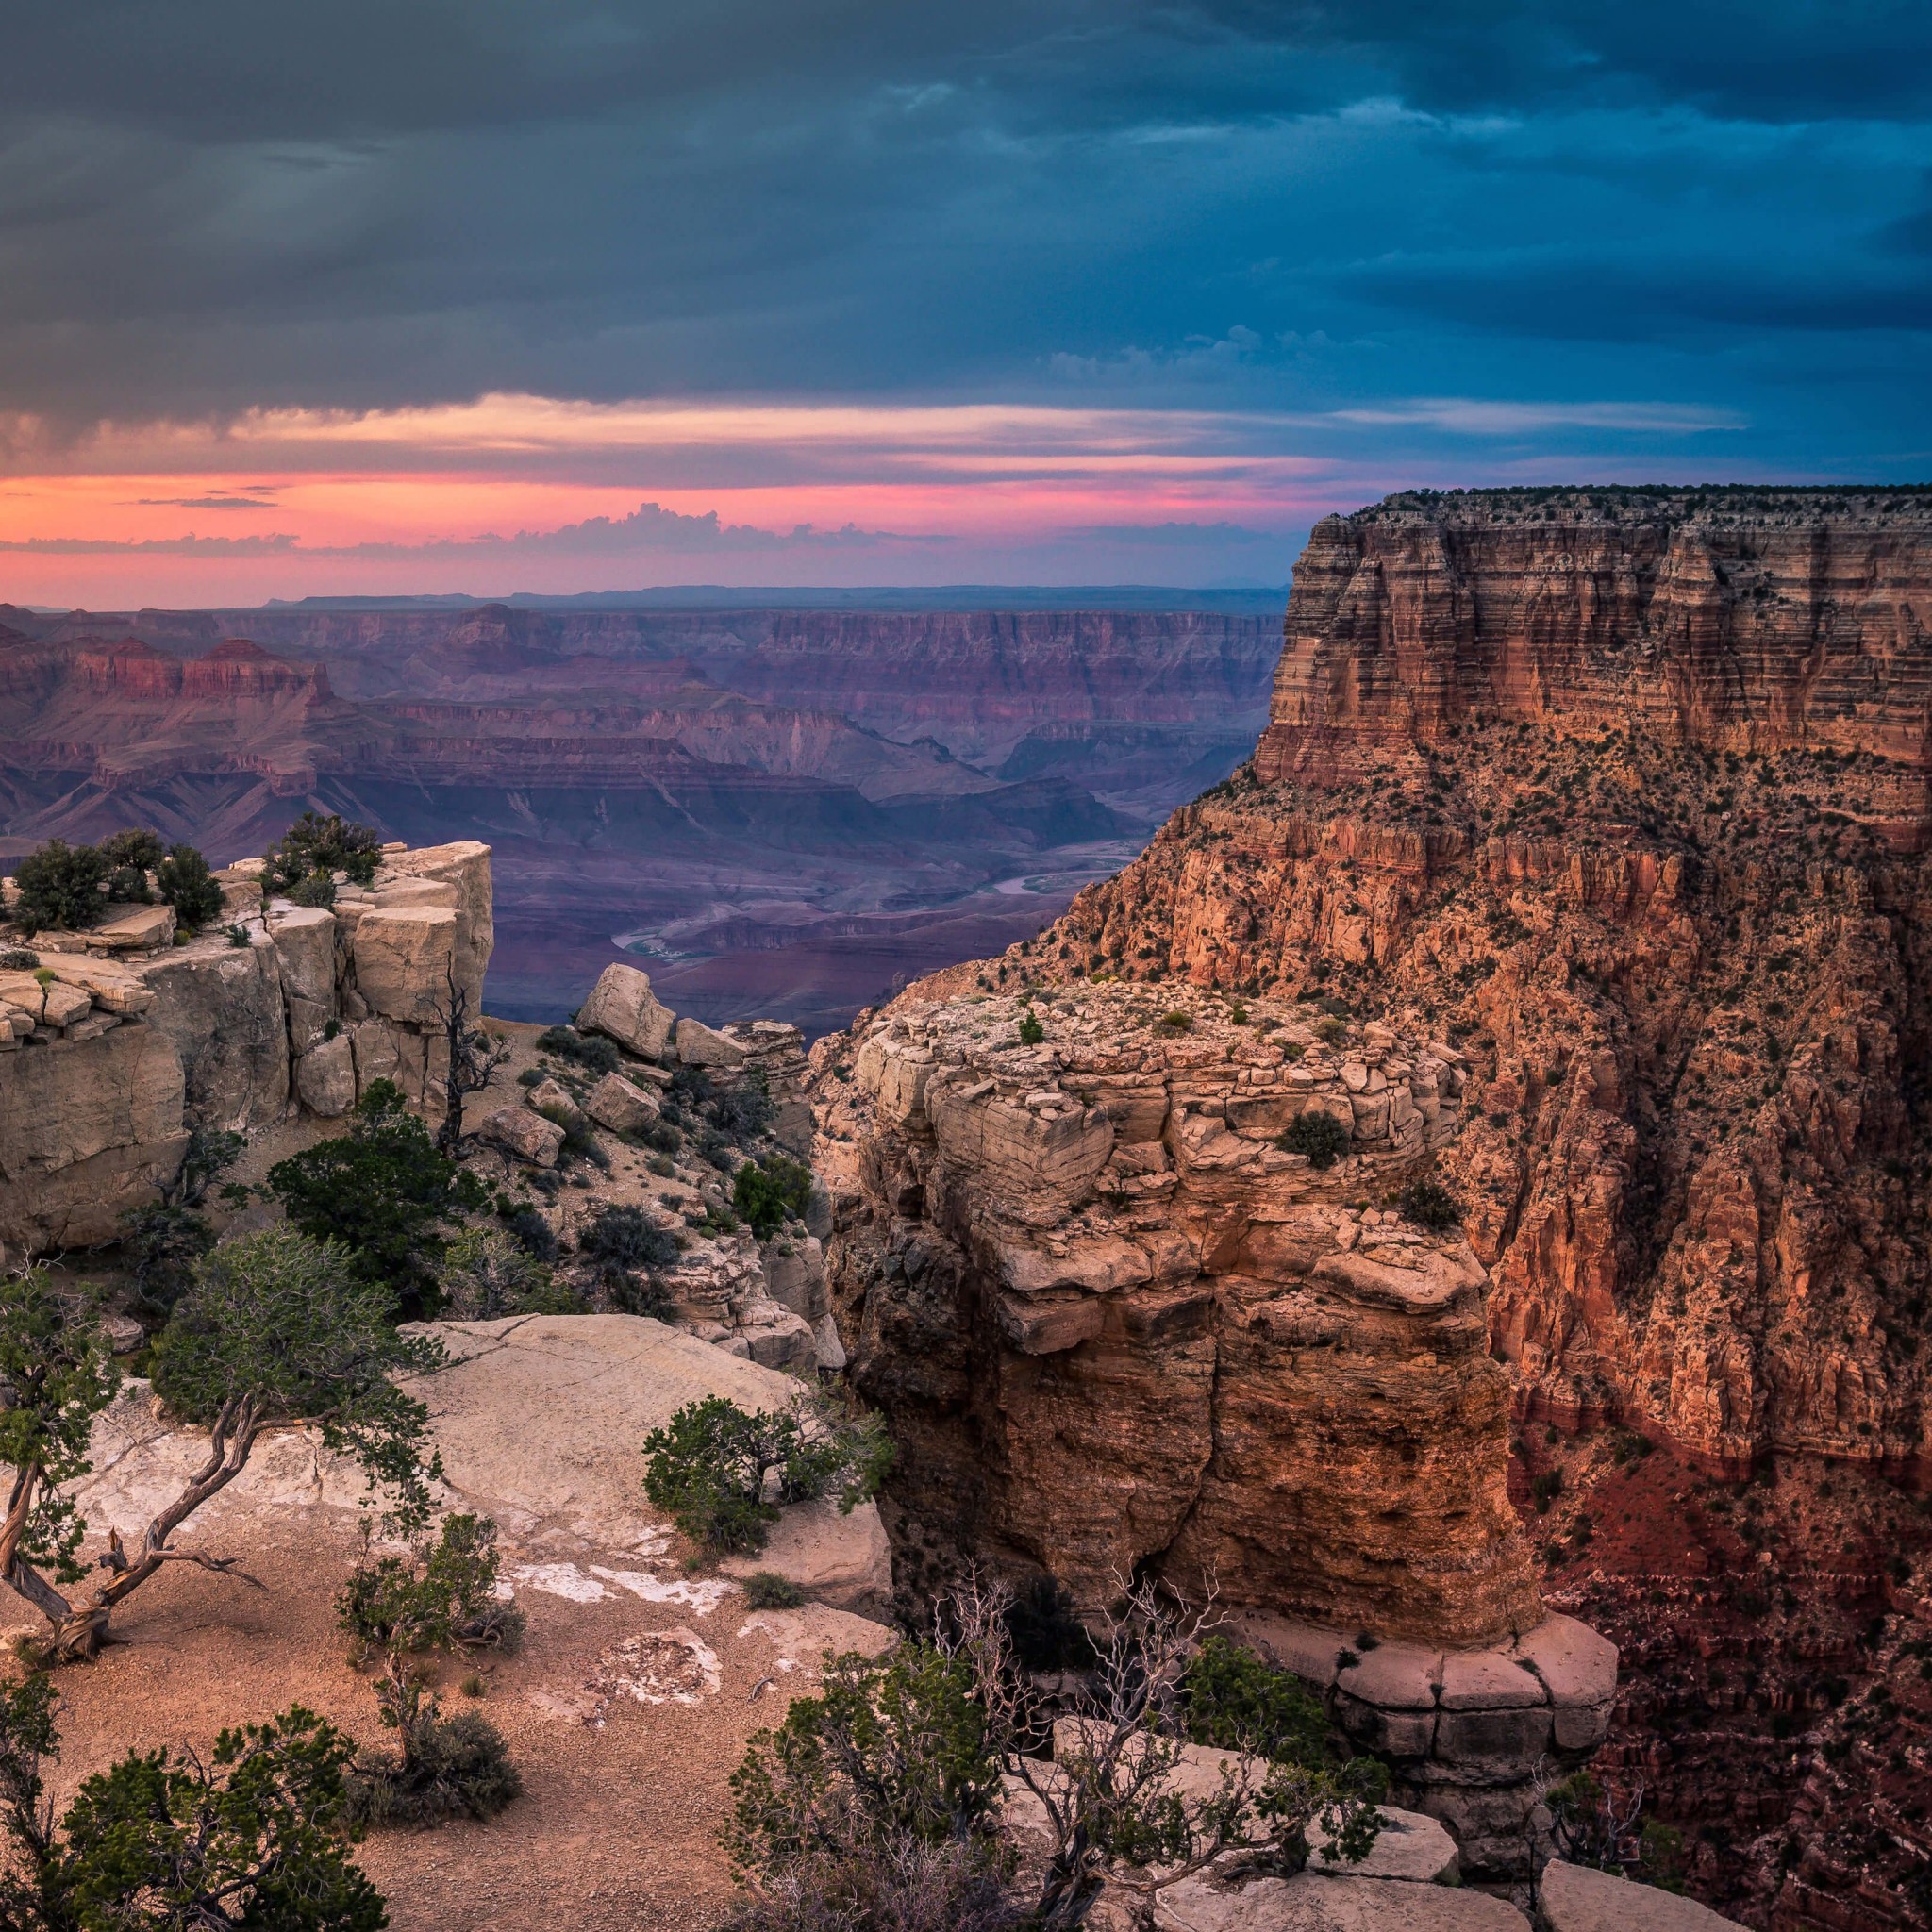 Sunset At The Grand Canyon Wallpaper for Google Nexus 9